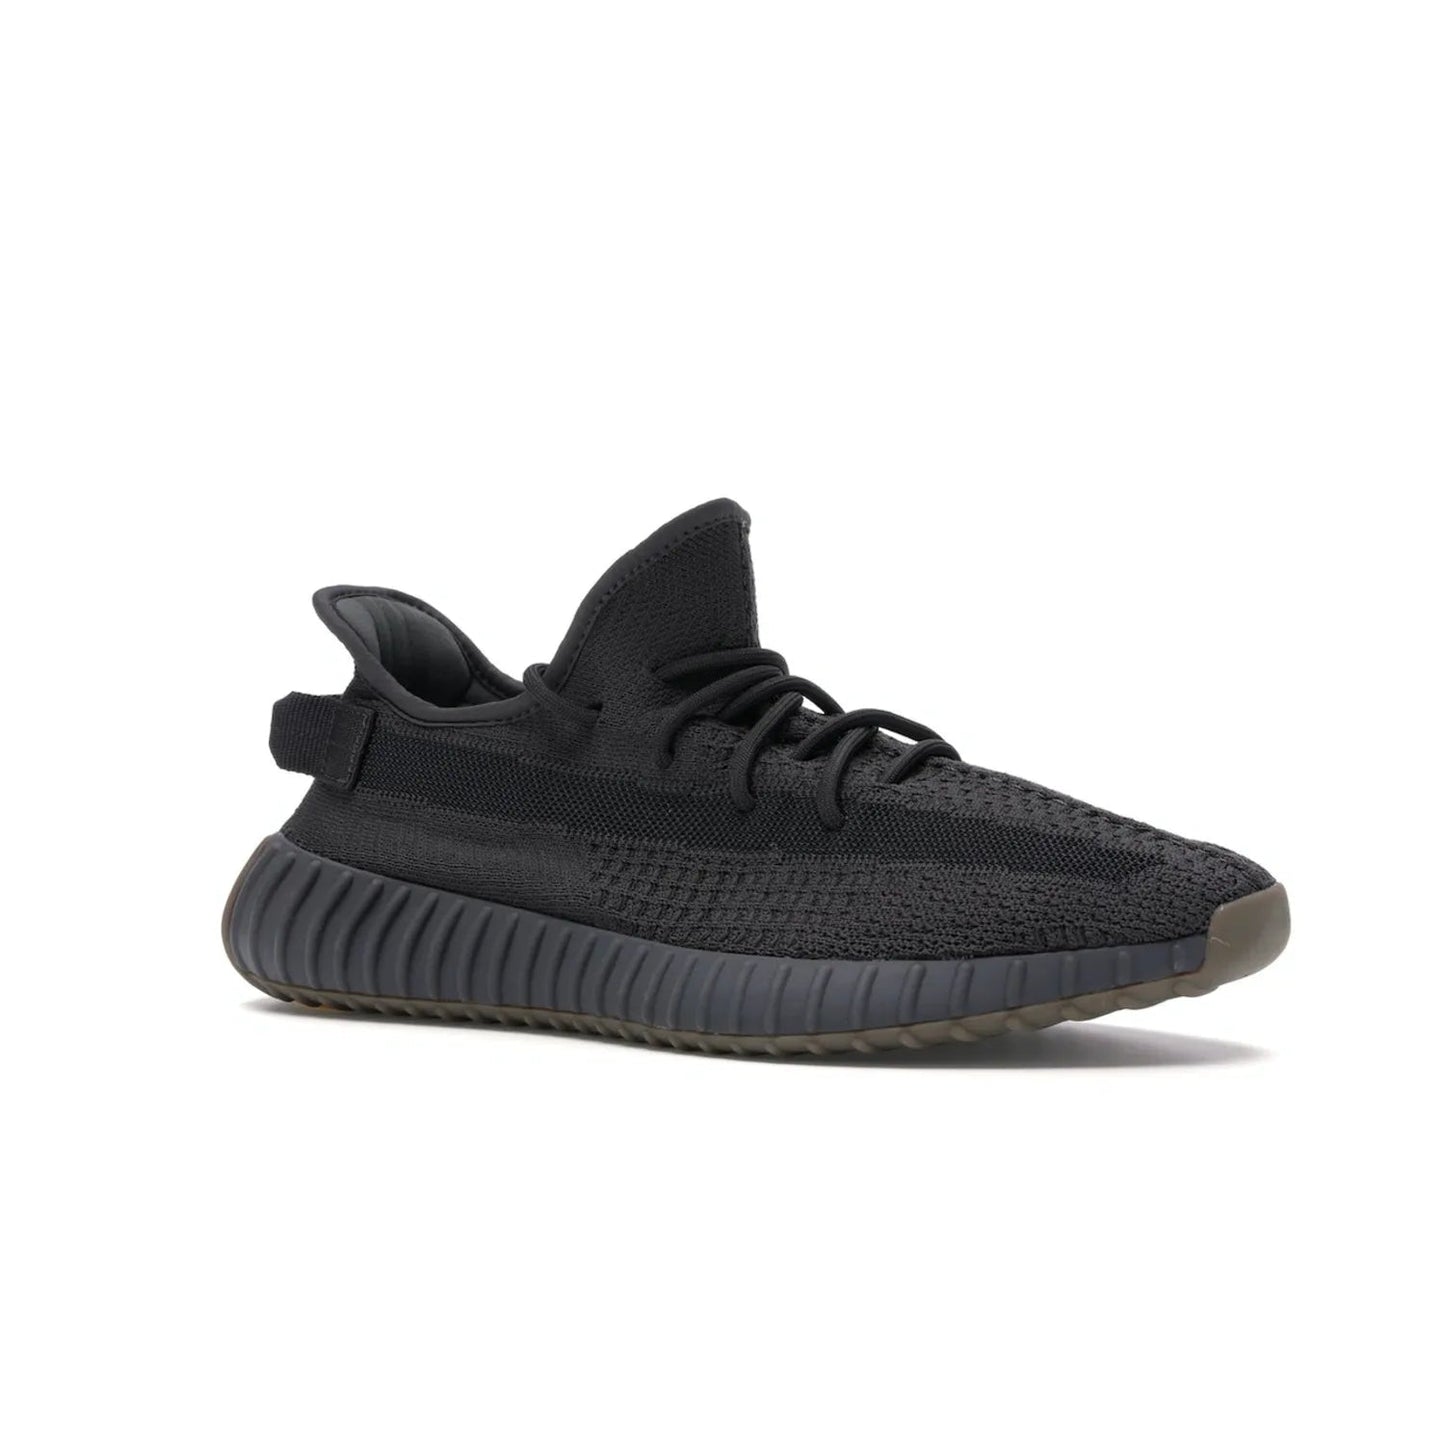 adidas Yeezy Boost 350 V2 Cinder - Image 4 - Only at www.BallersClubKickz.com - Shop for the stylish and eye catching adidas Yeezy 350 V2 Cinder in earth tones. Boost cushioned midsole and gold outsole add a touch of boldness. A timeless addition to any wardrobe.